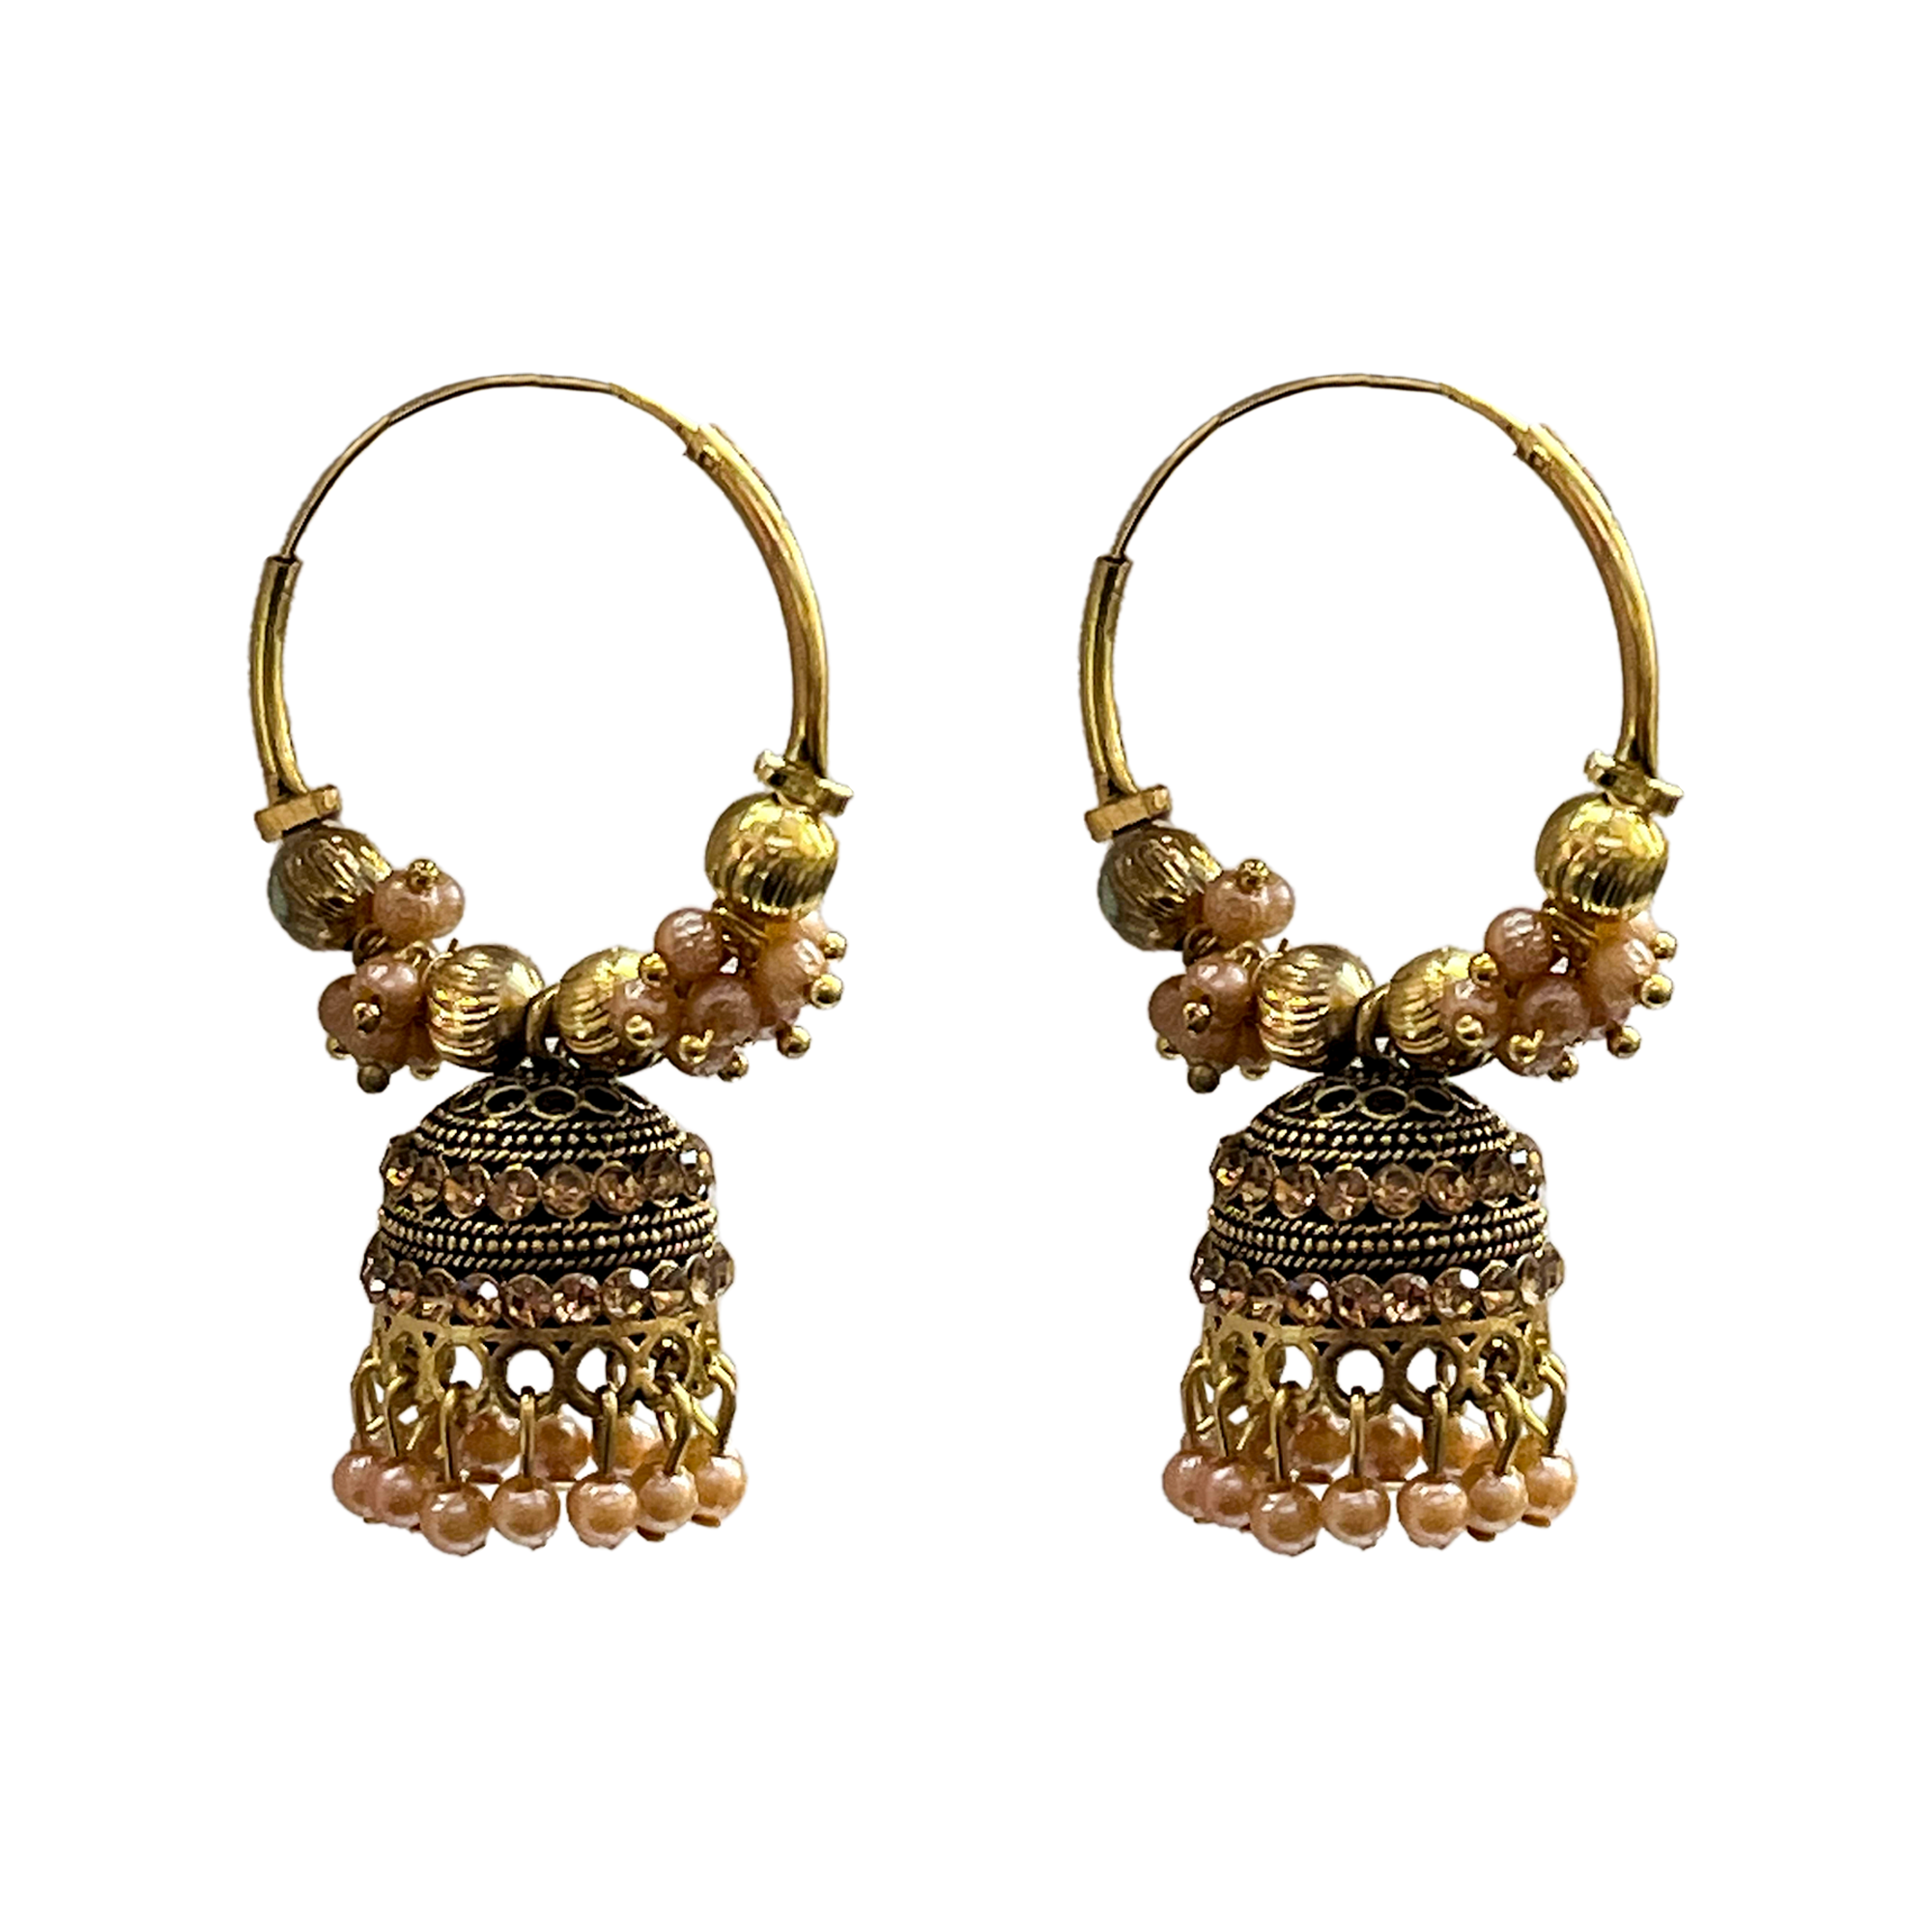 Light Weighted Gold Bali Earrings